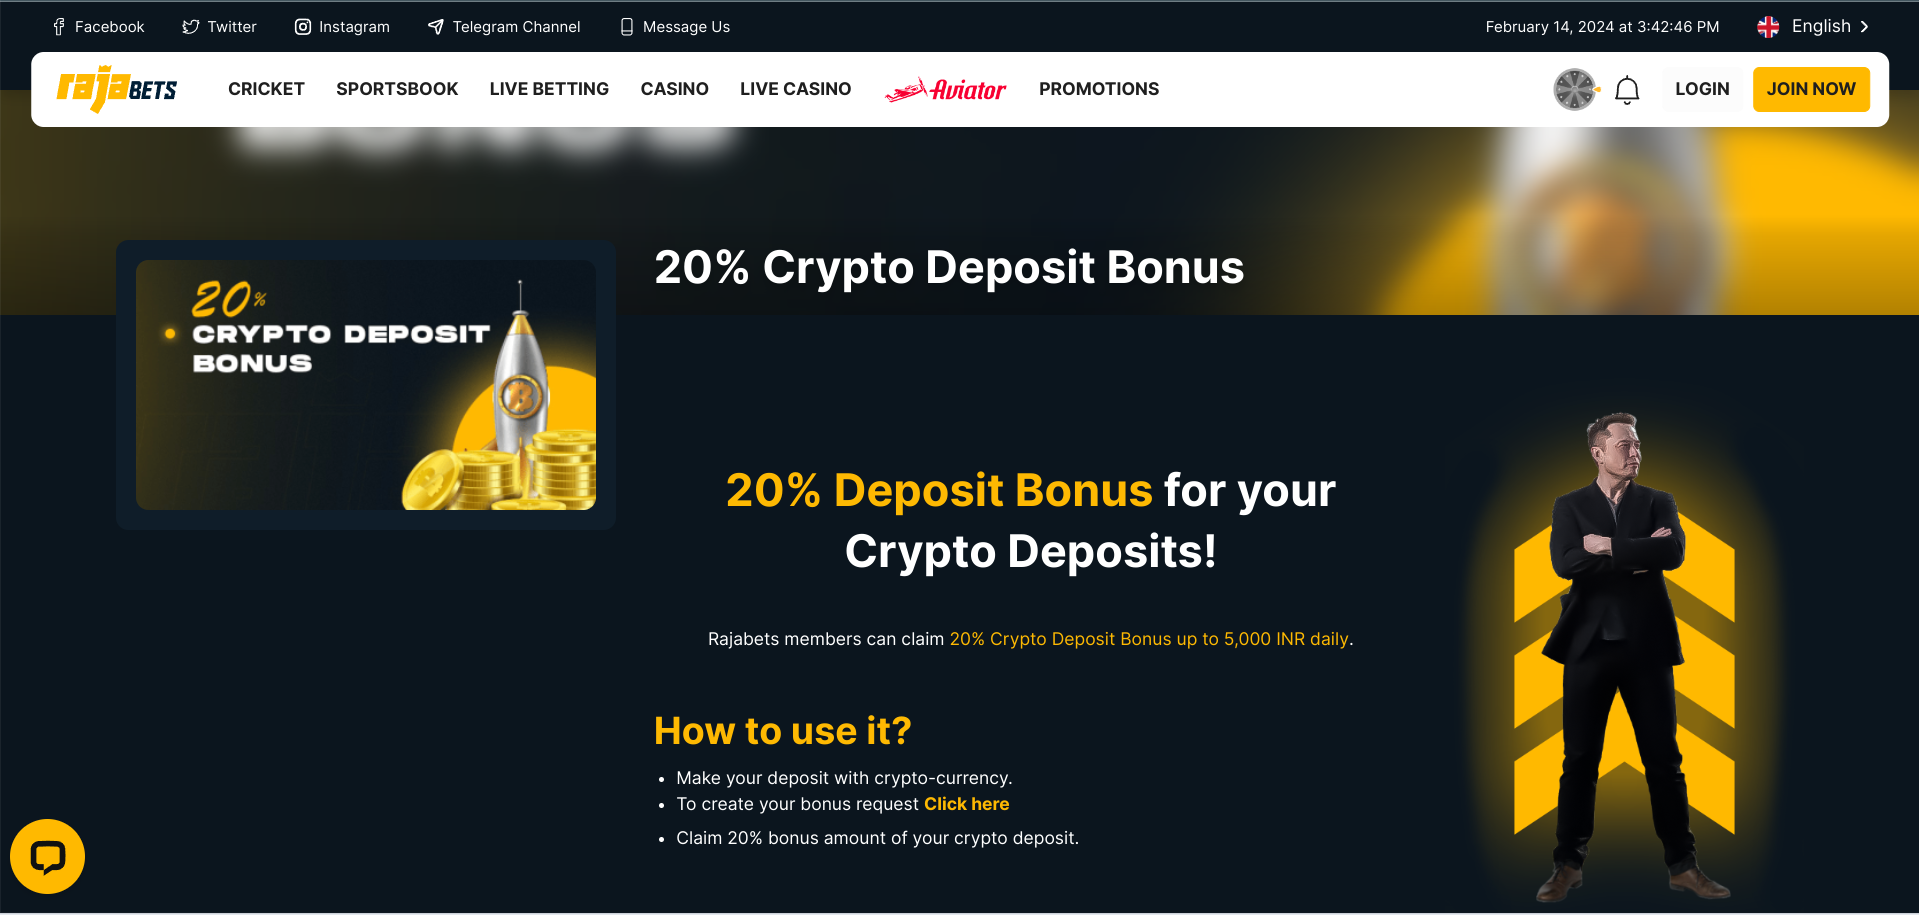 Rajabets caters to crypto enthusiasts with a 20% Crypto Deposit Bonus.